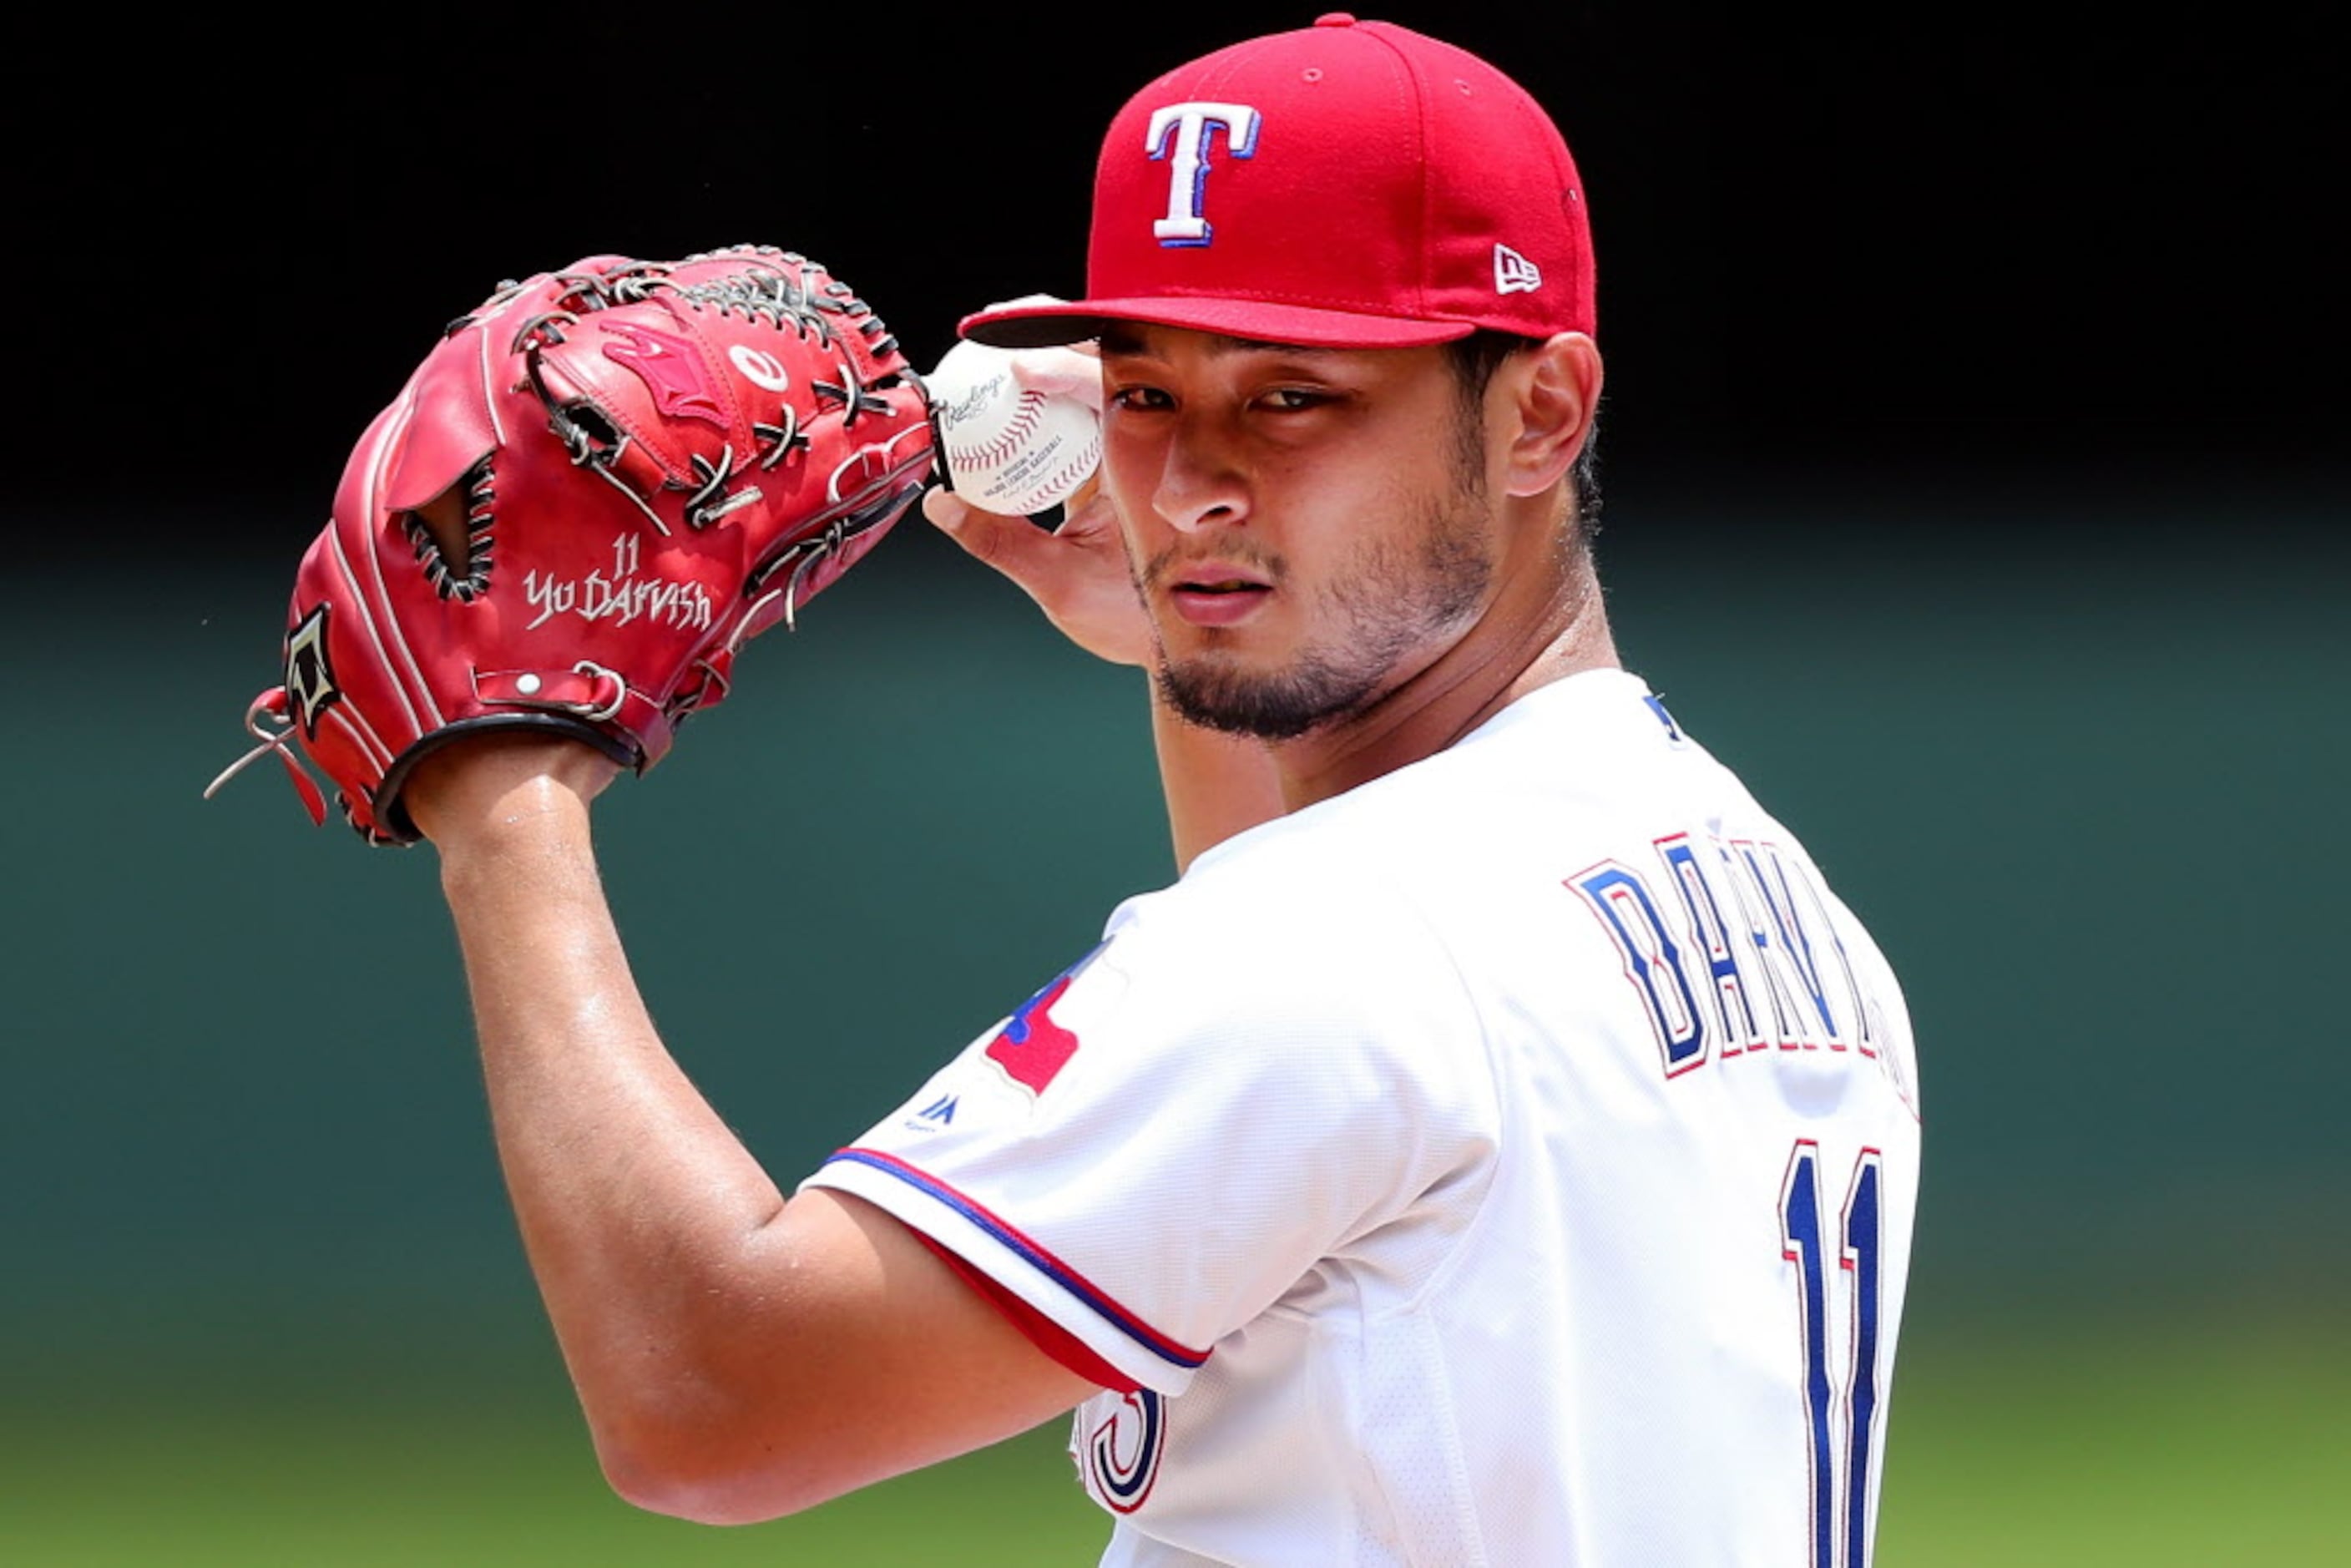 Los Angeles Dodgers: What's the rotation without Yu Darvish?